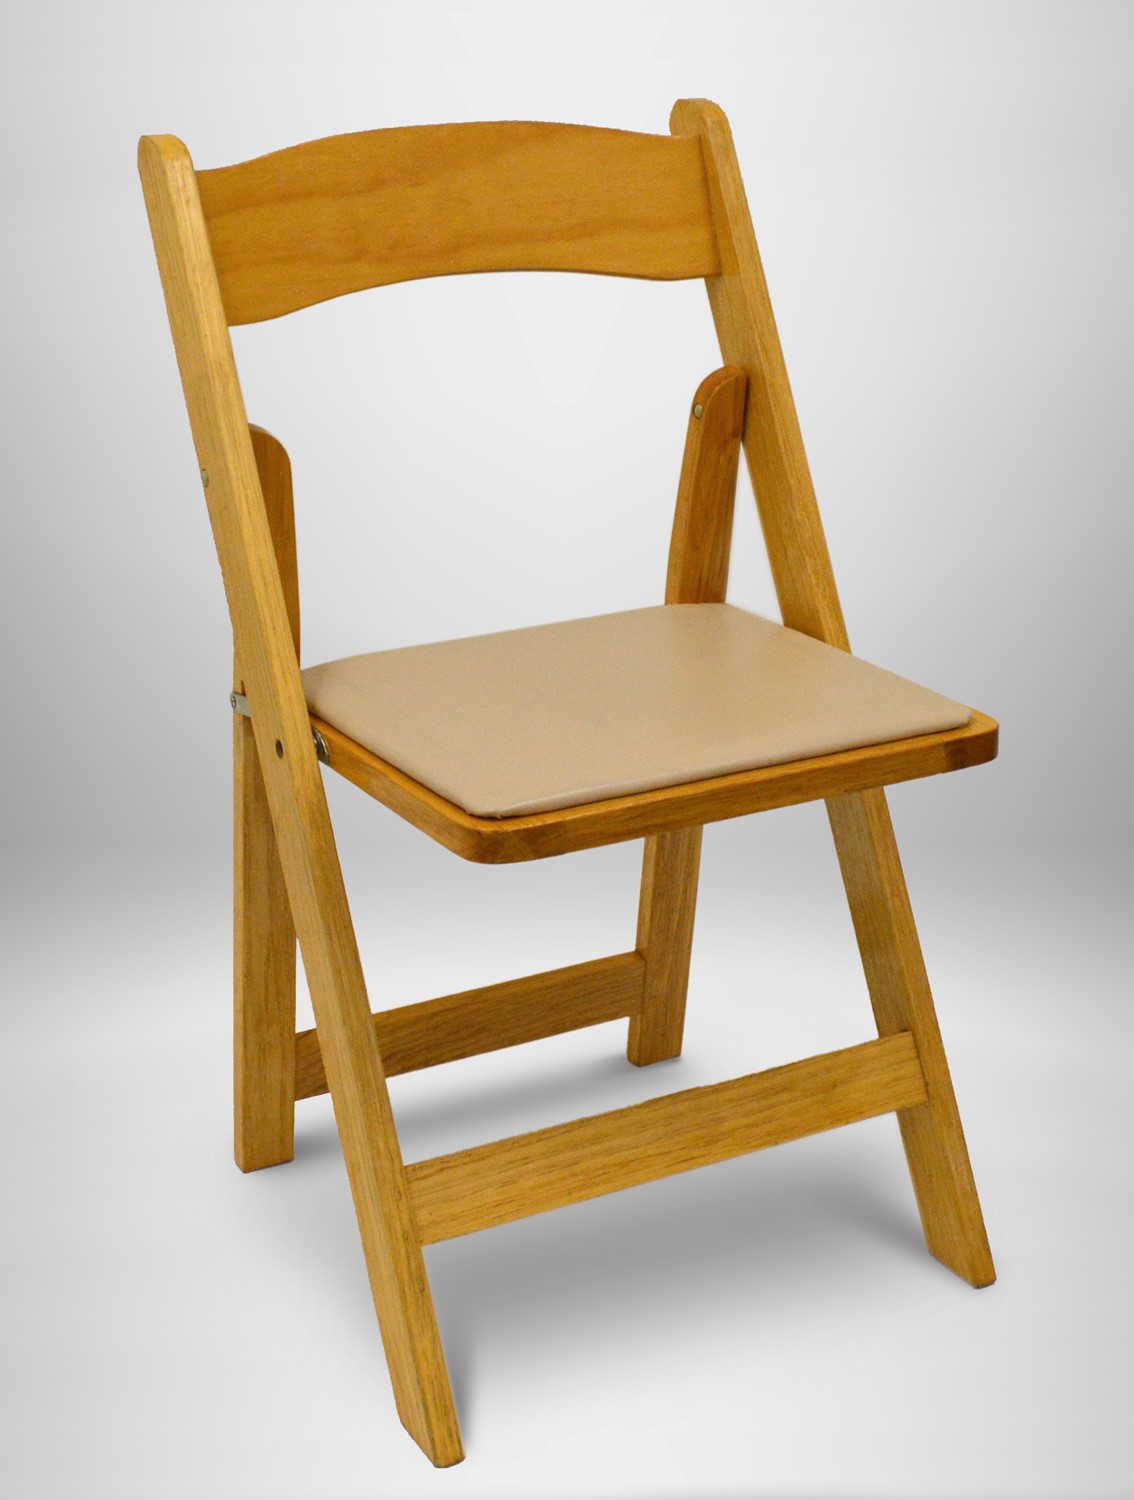 Natural Wood Folding Chairs - West Coast Event Productions, Inc.